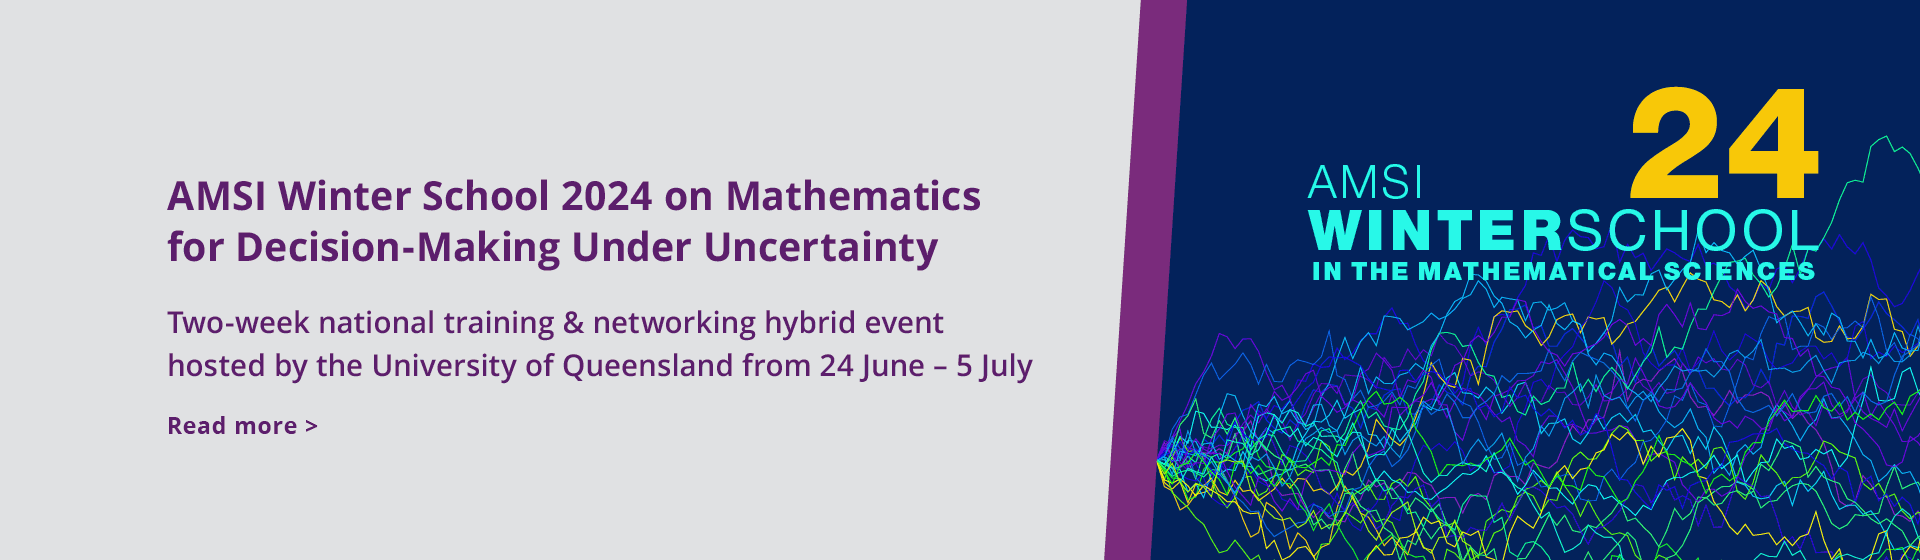 2024 AMSI Winter School on Mathematics for Decision-Making Under Uncertainty